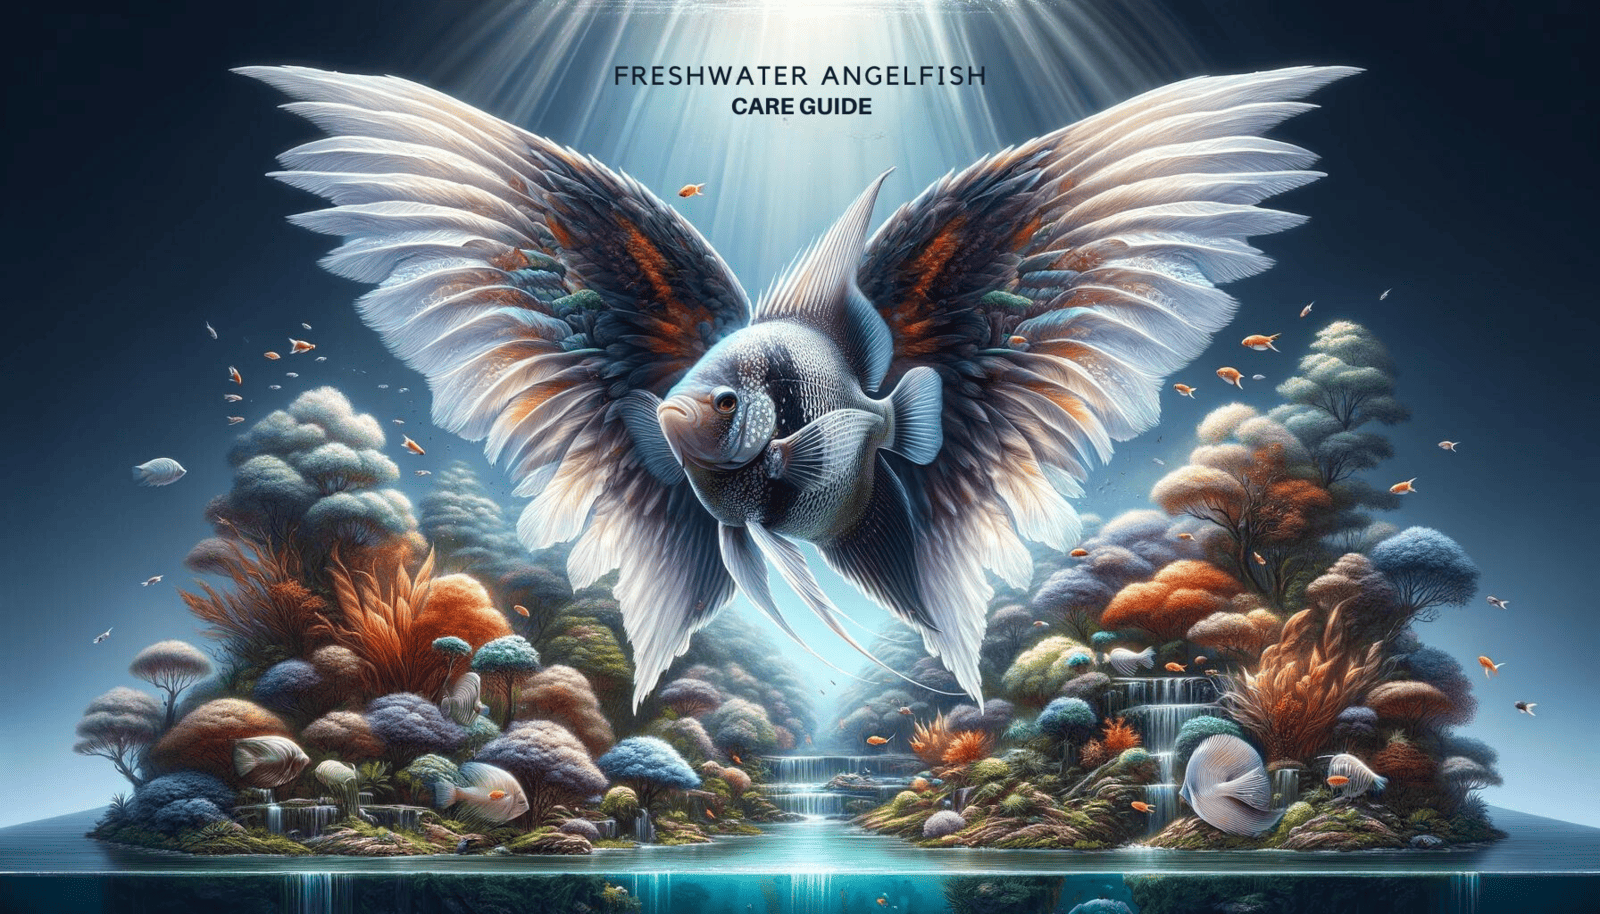 A majestic zebra freshwater angelfish is depicted with grand, ethereal wings spanning outward on both sides, set against a surreal backdrop of aquatic plants and other smaller angelfish, with rays of light illuminating the scene. Above the image, the text reads "Freshwater Angelfish Care Guide," indicating a comprehensive guide on the subject.